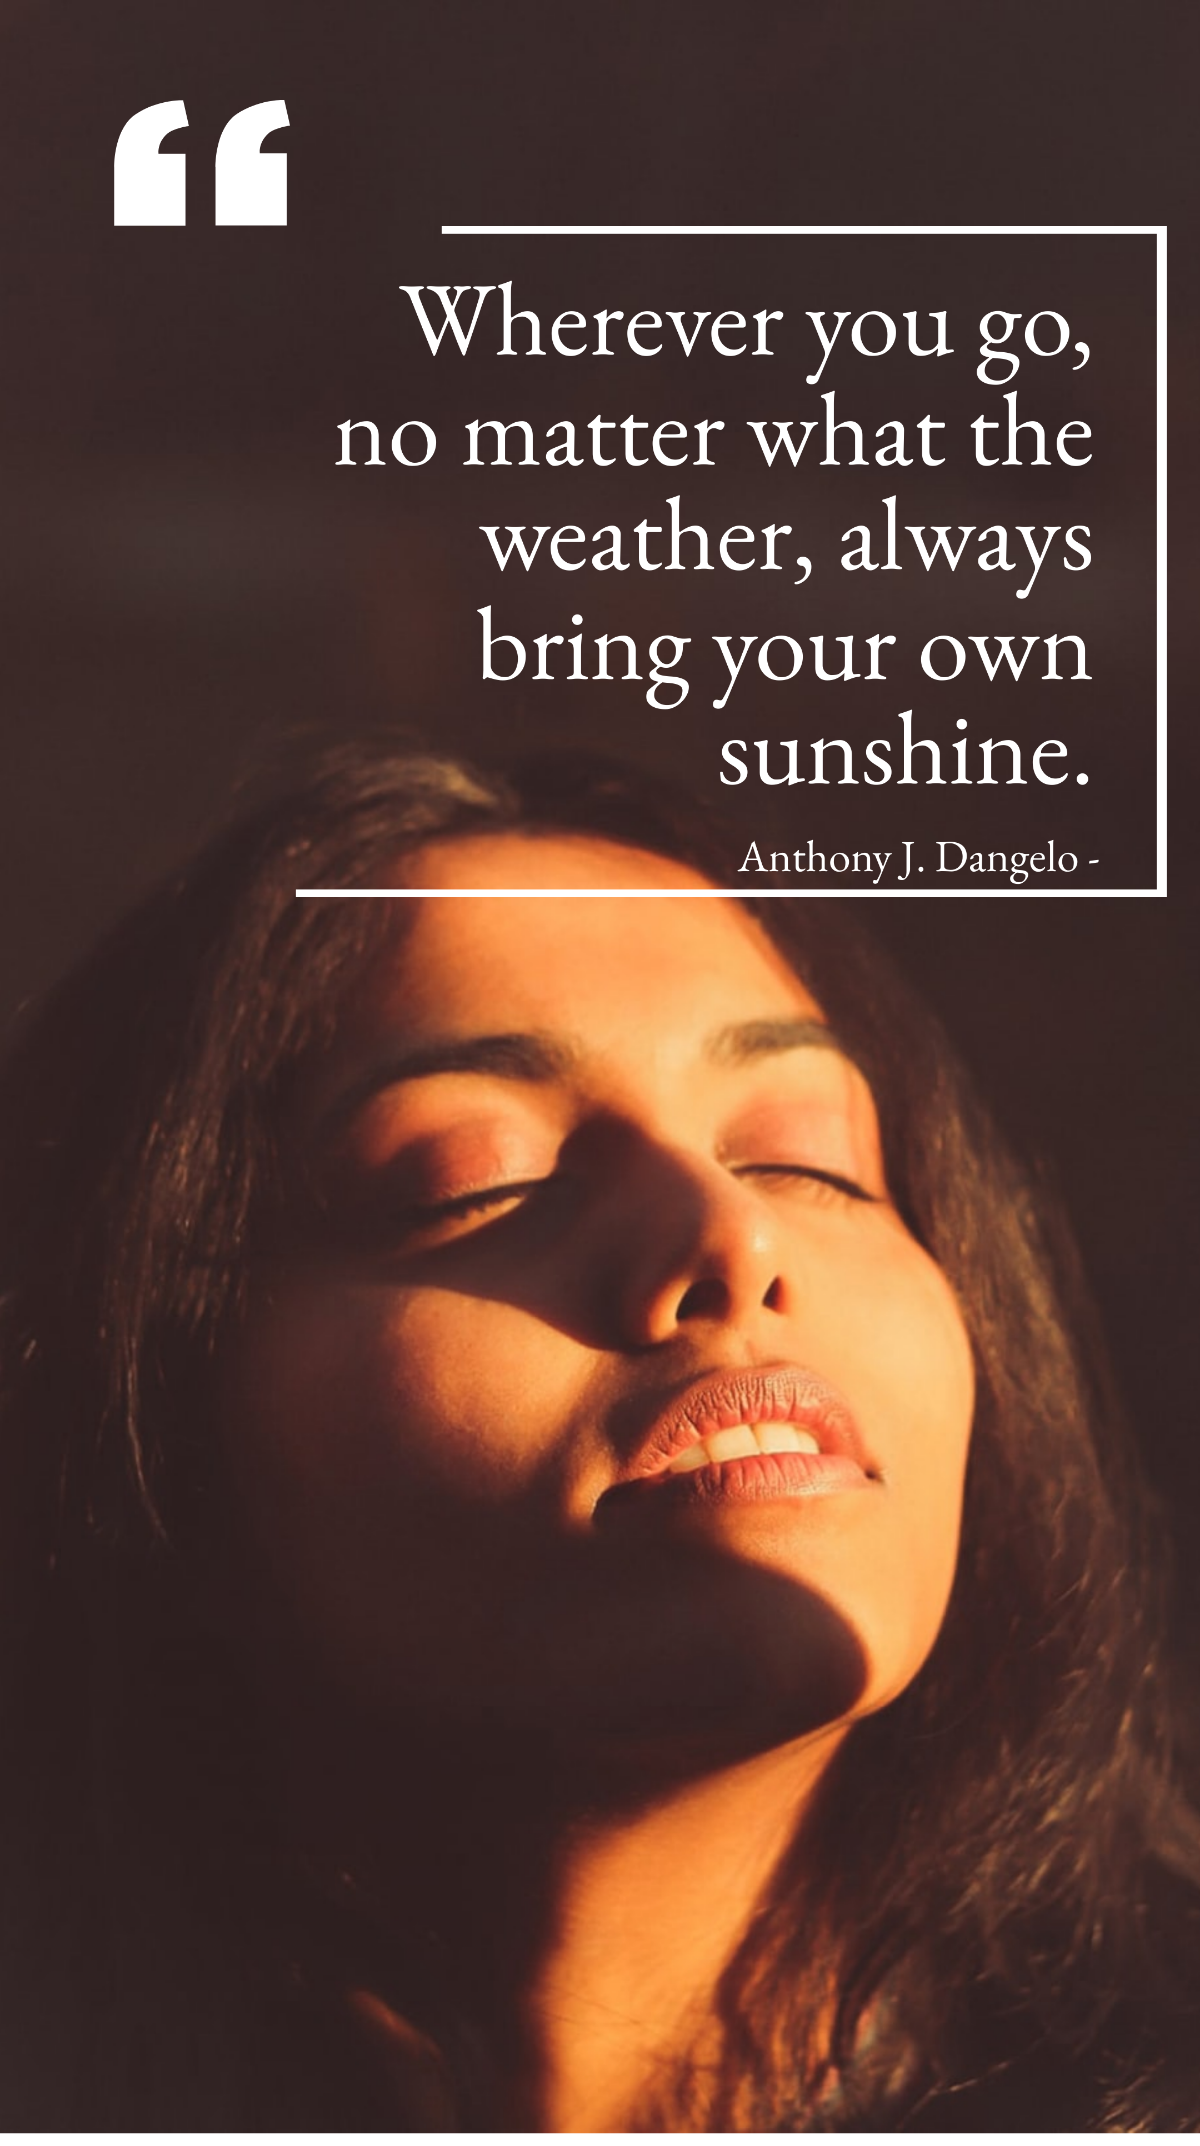 Anthony J. Dangelo - Wherever you go, no matter what the weather, always bring your own sunshine. Template